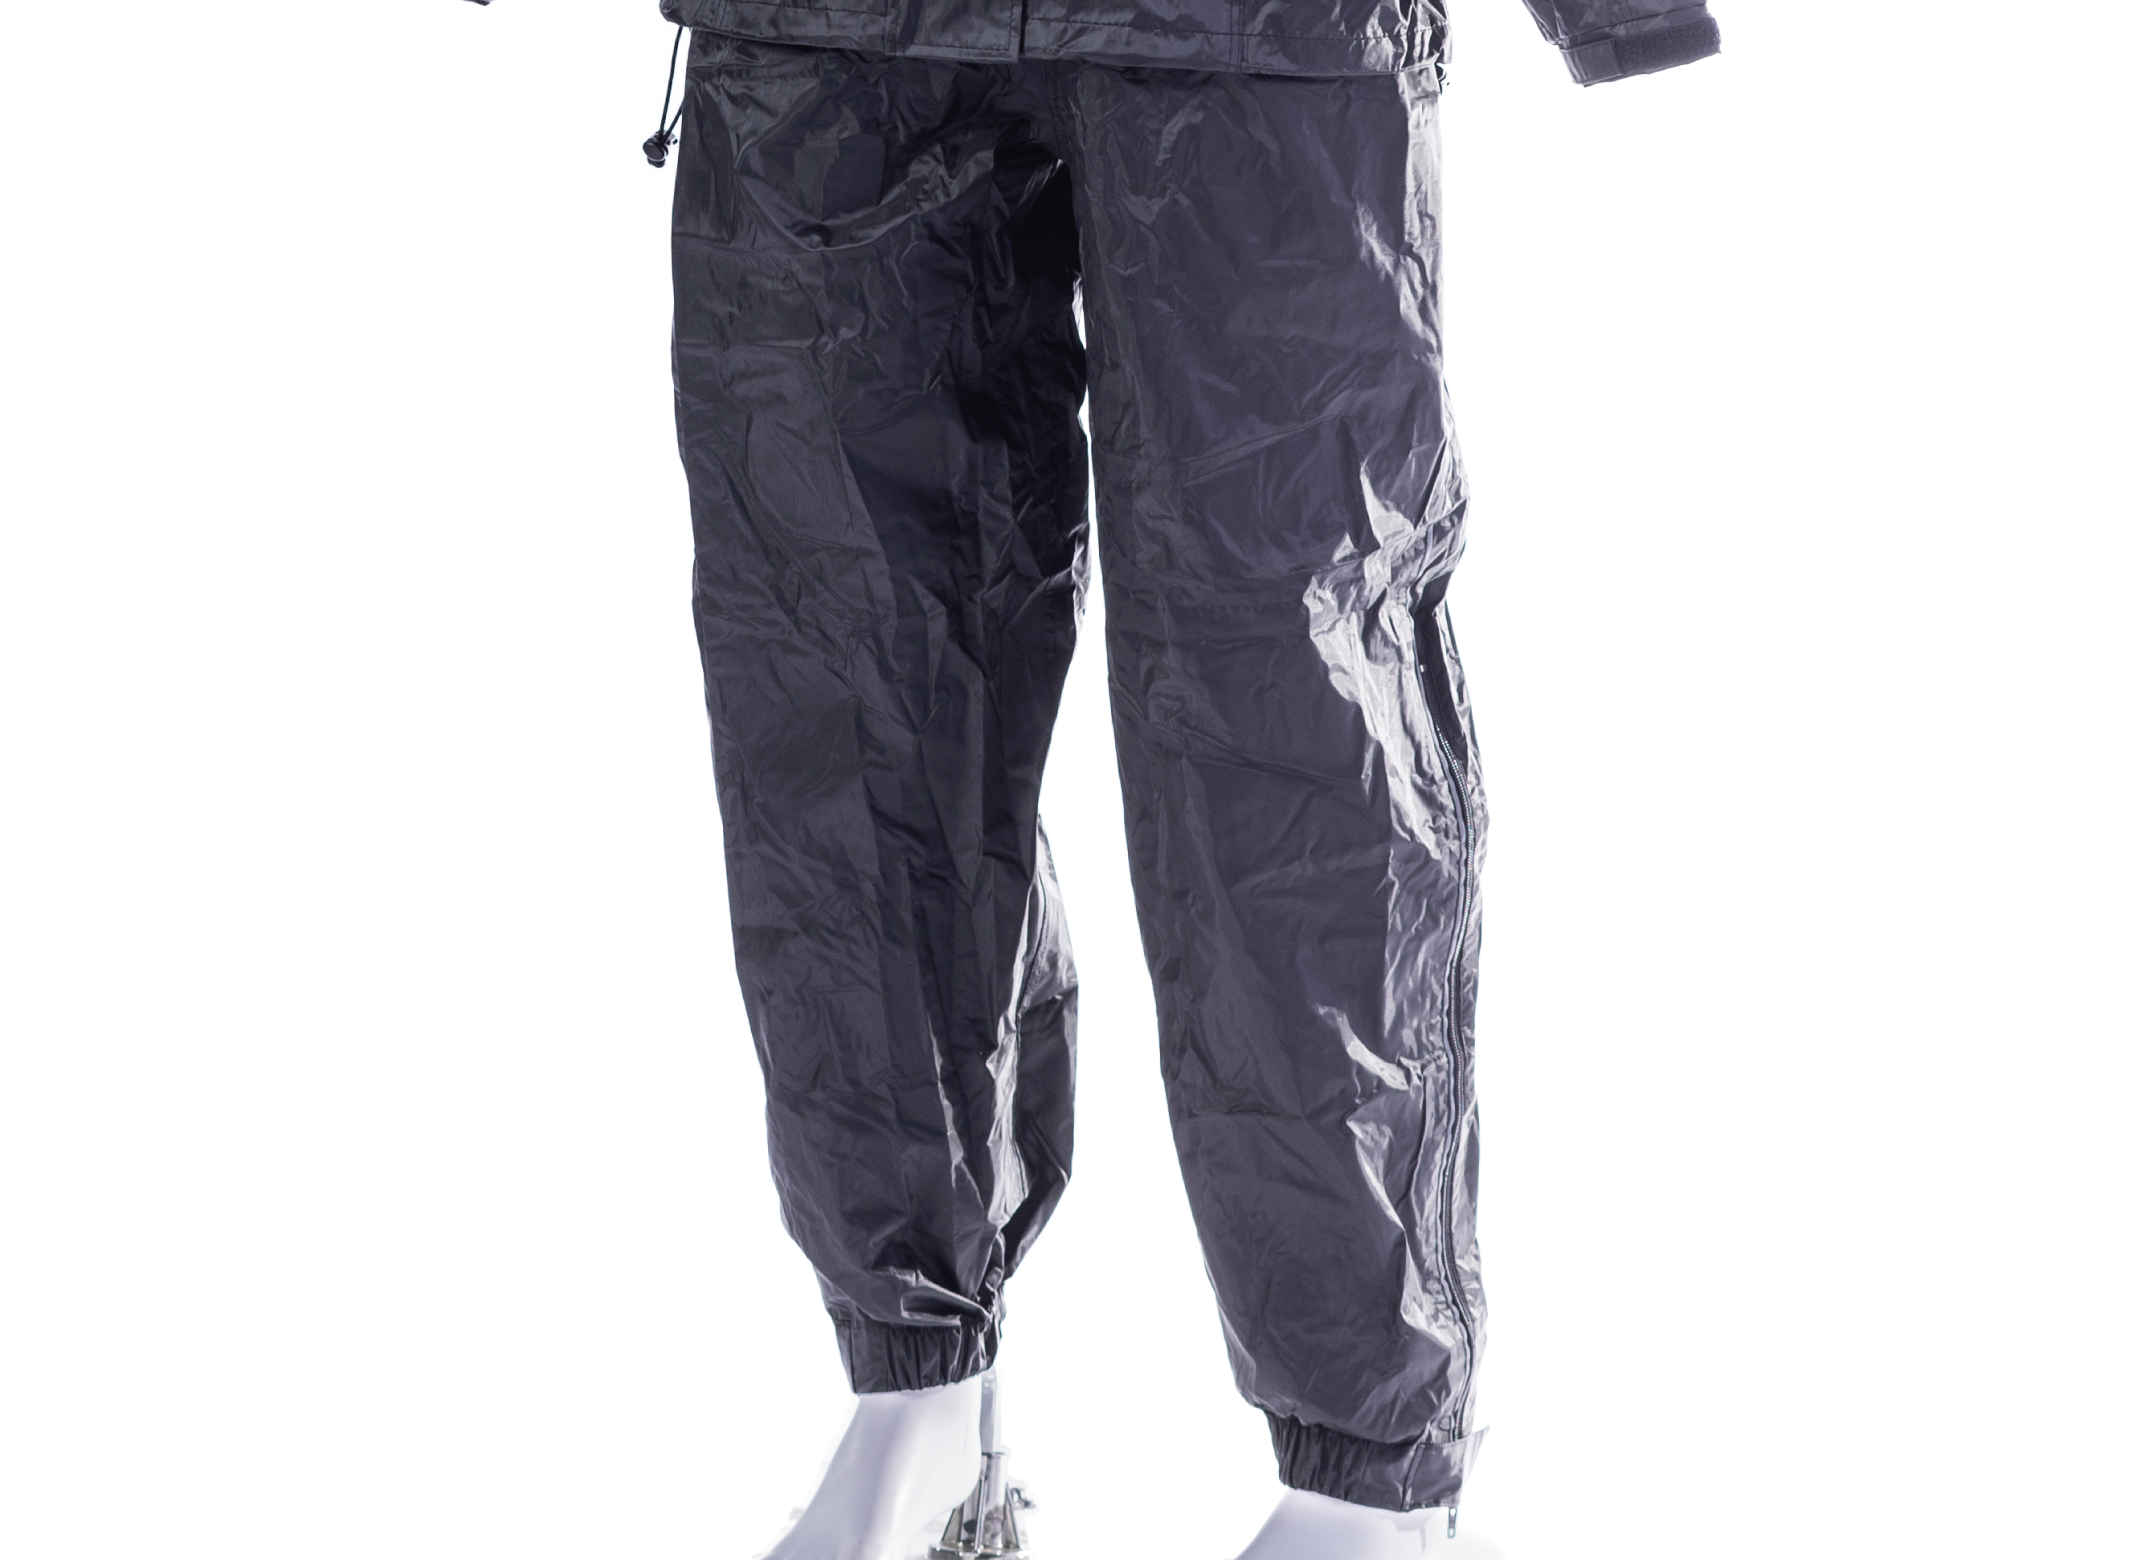 BSA Rainseal Over Trousers